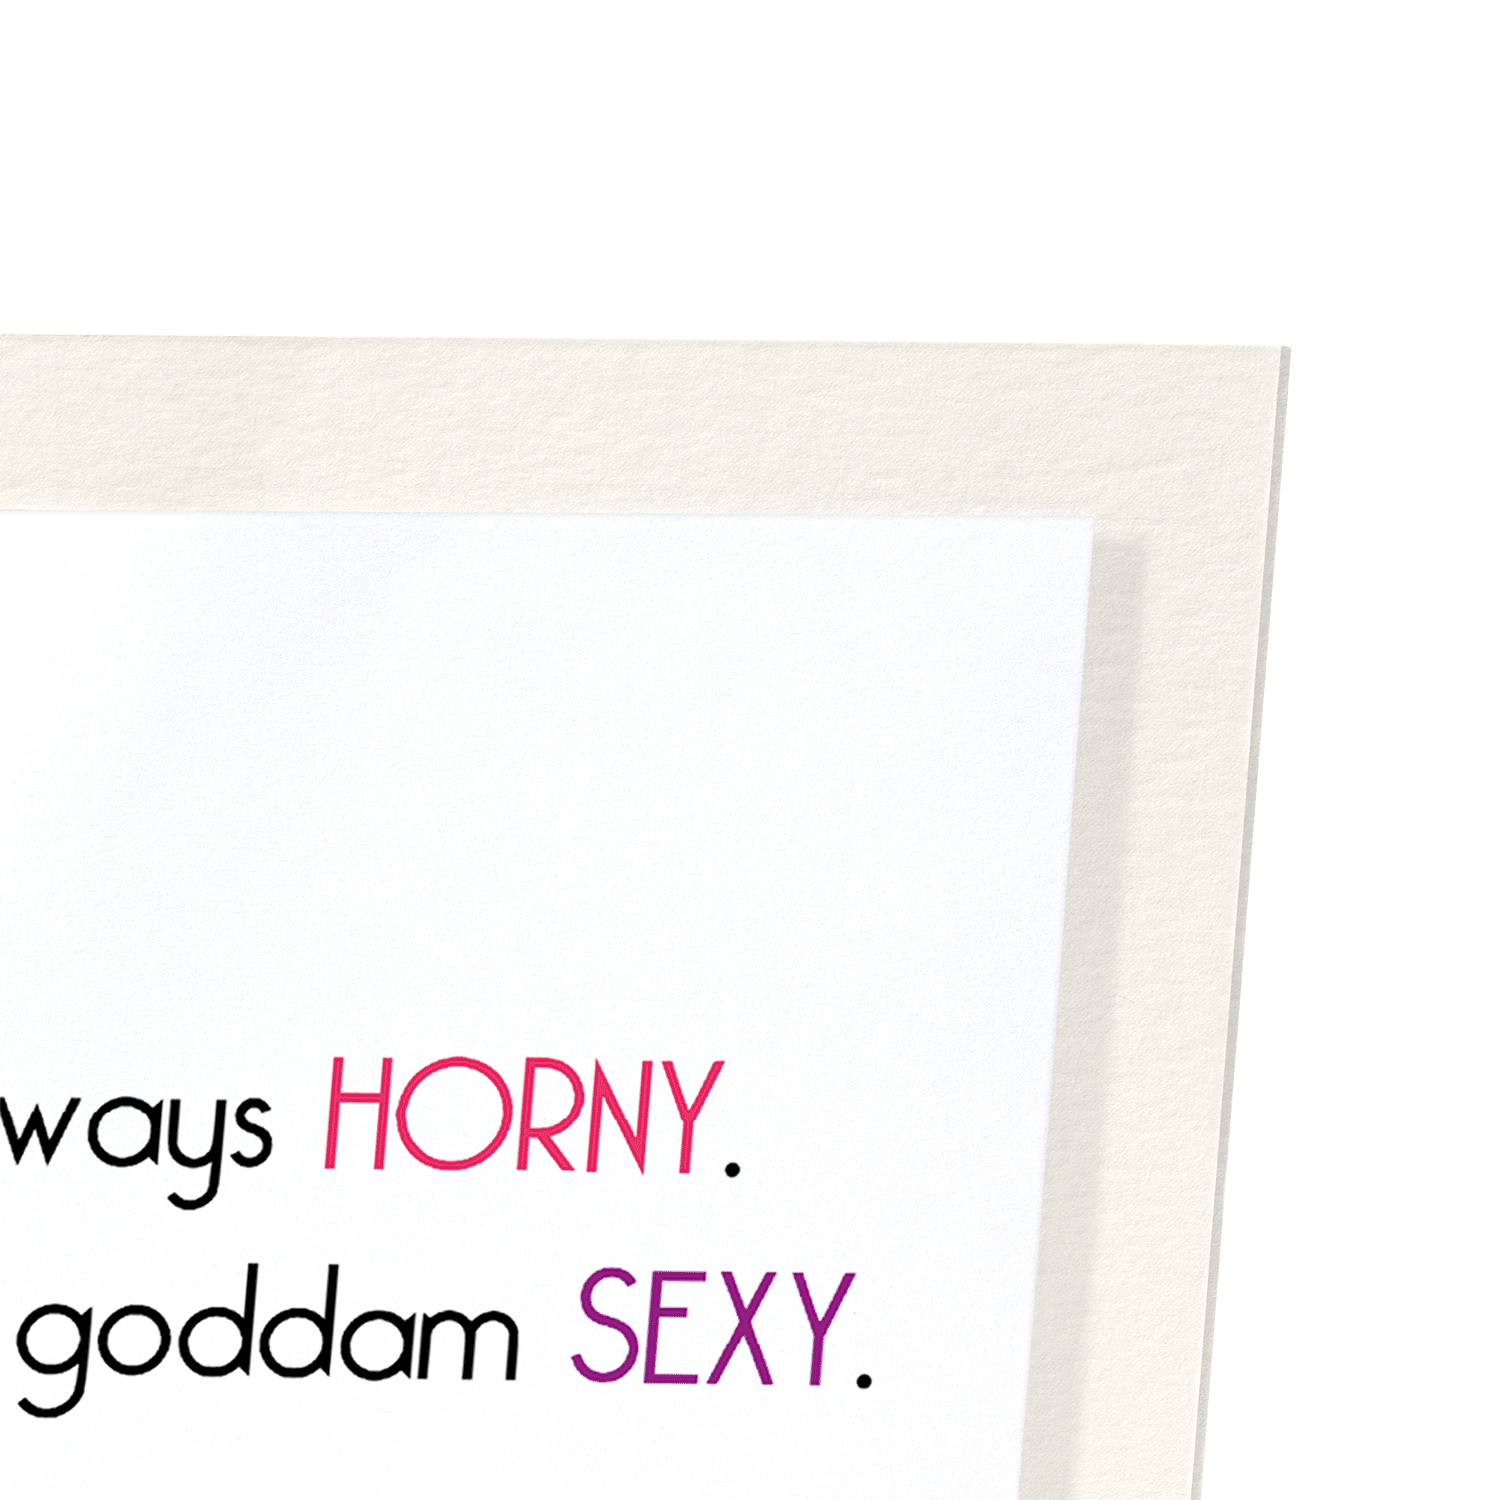 YOU'RE JUST ALWAYS SEXY: Funny Animal Art print